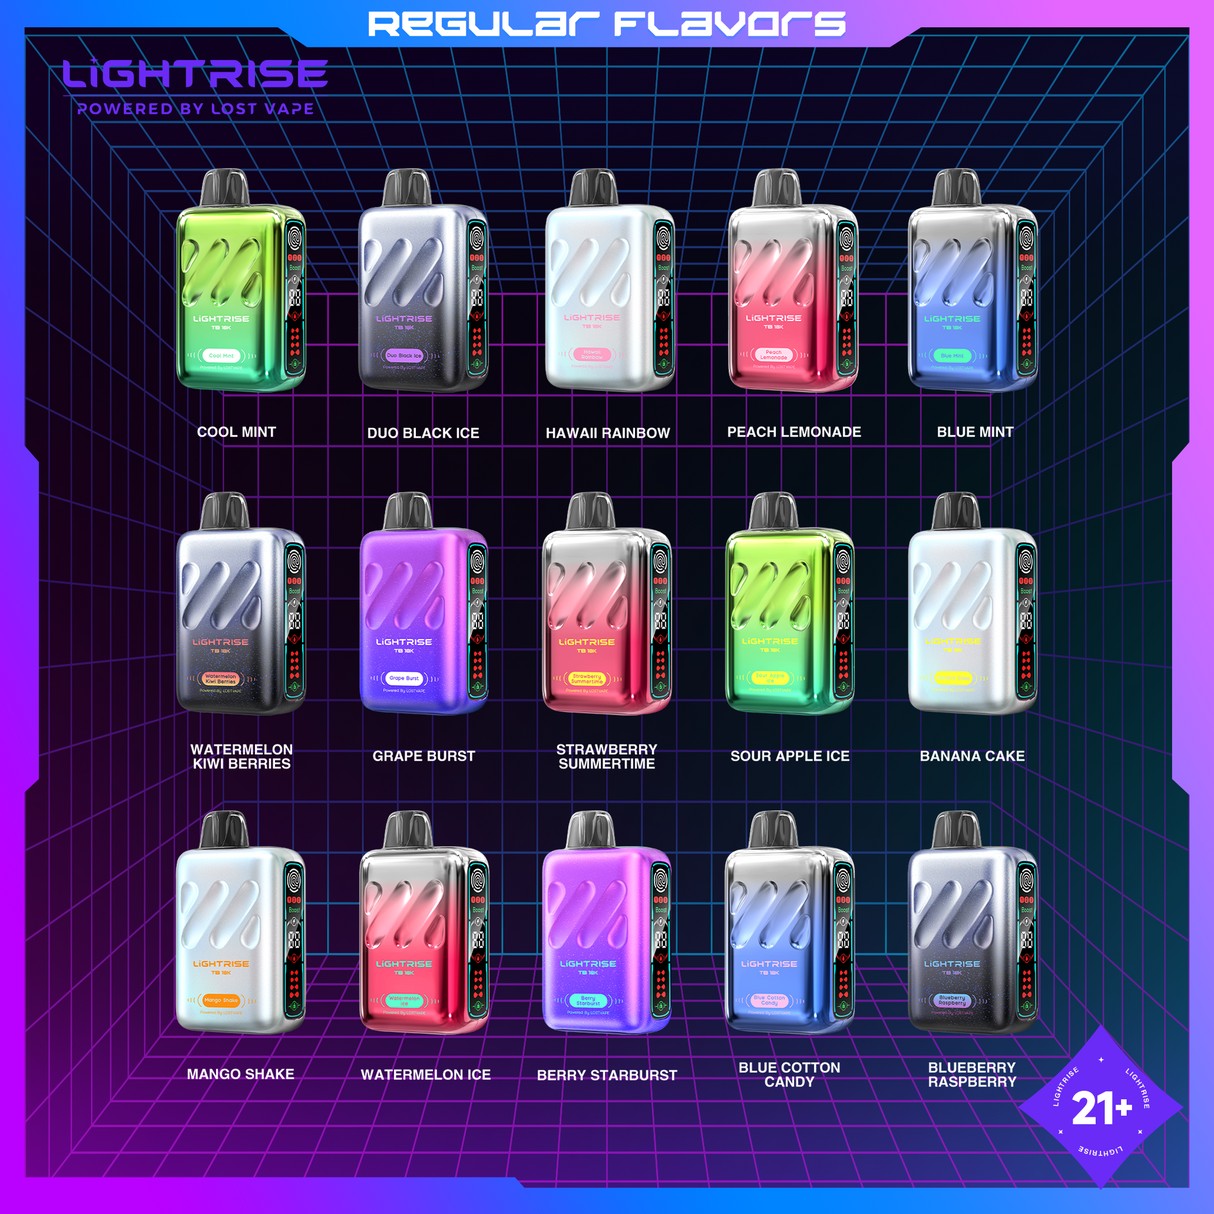 LIGHTRISE TB 18K Powered By Lost Vape flavors